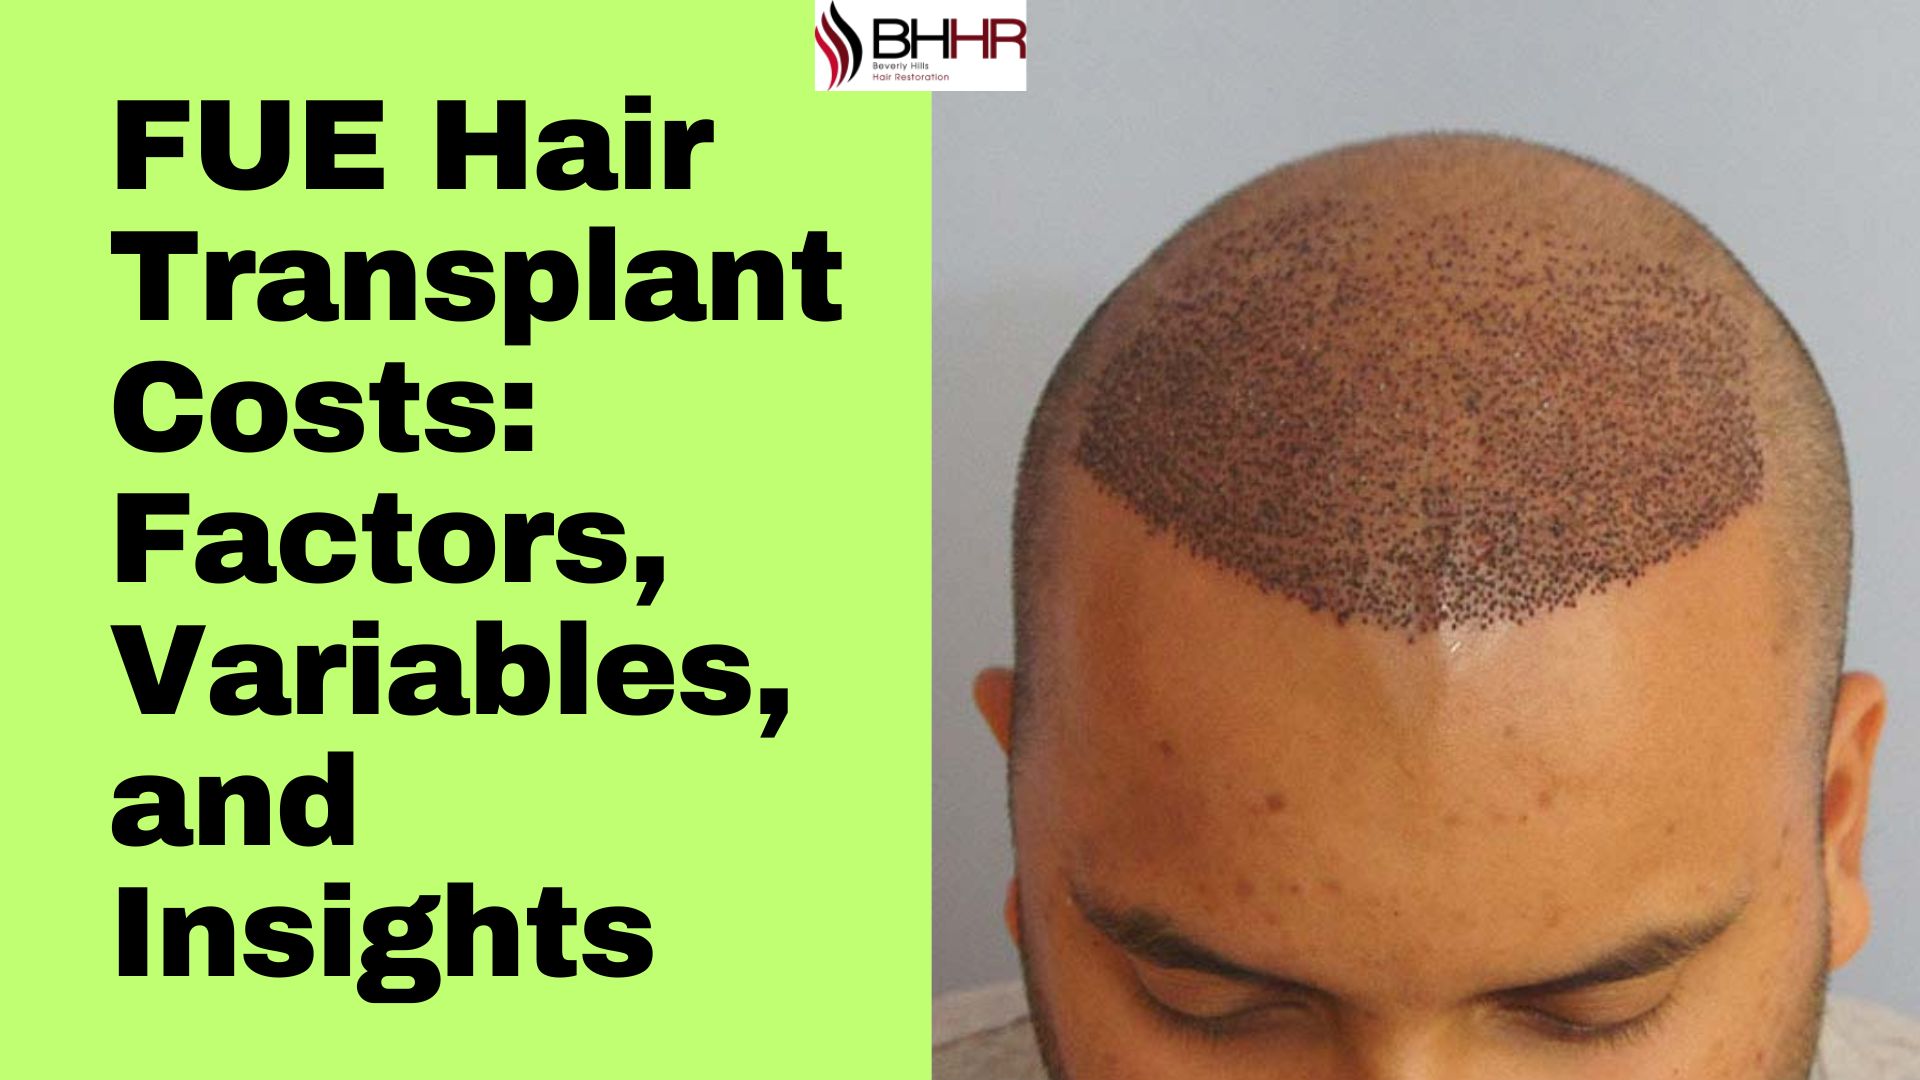 FUE Hair Transplant Costs: Factors, Variables, and Insights